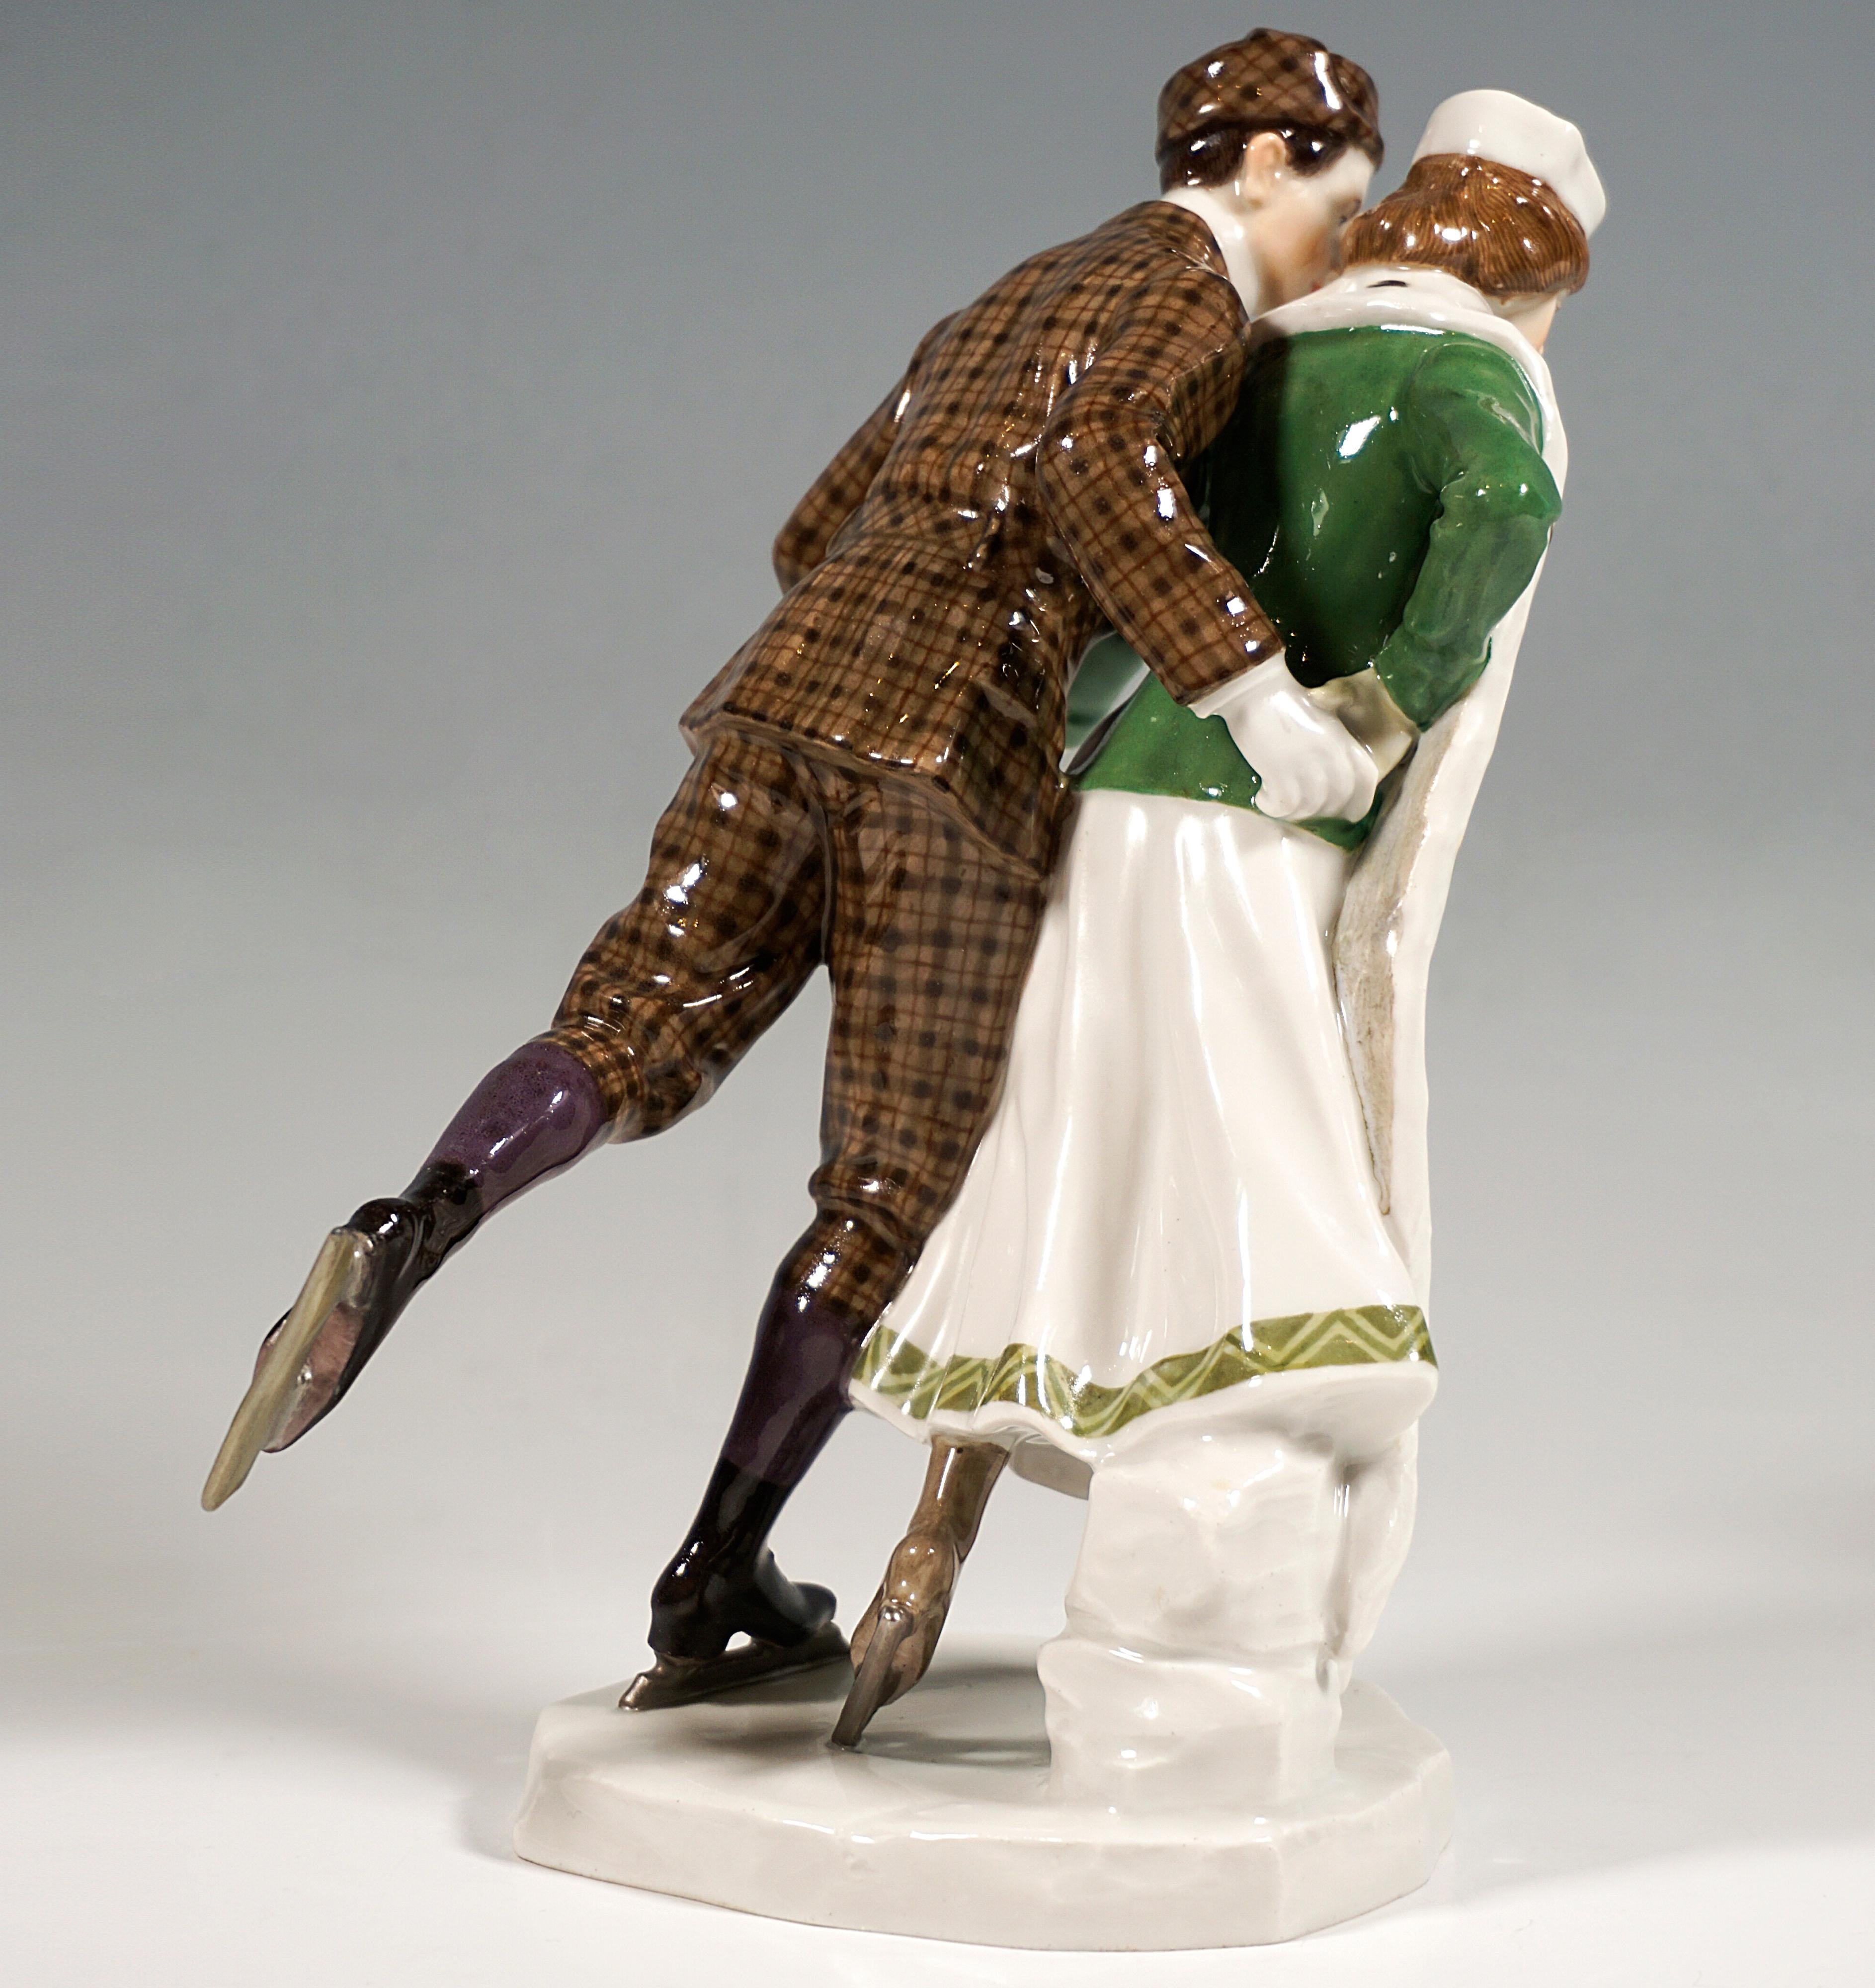 Hand-Crafted Art Nouveau Figure Group 'Ice-Scaters', by Alfred Koenig, Meissen Germany, 1910 For Sale